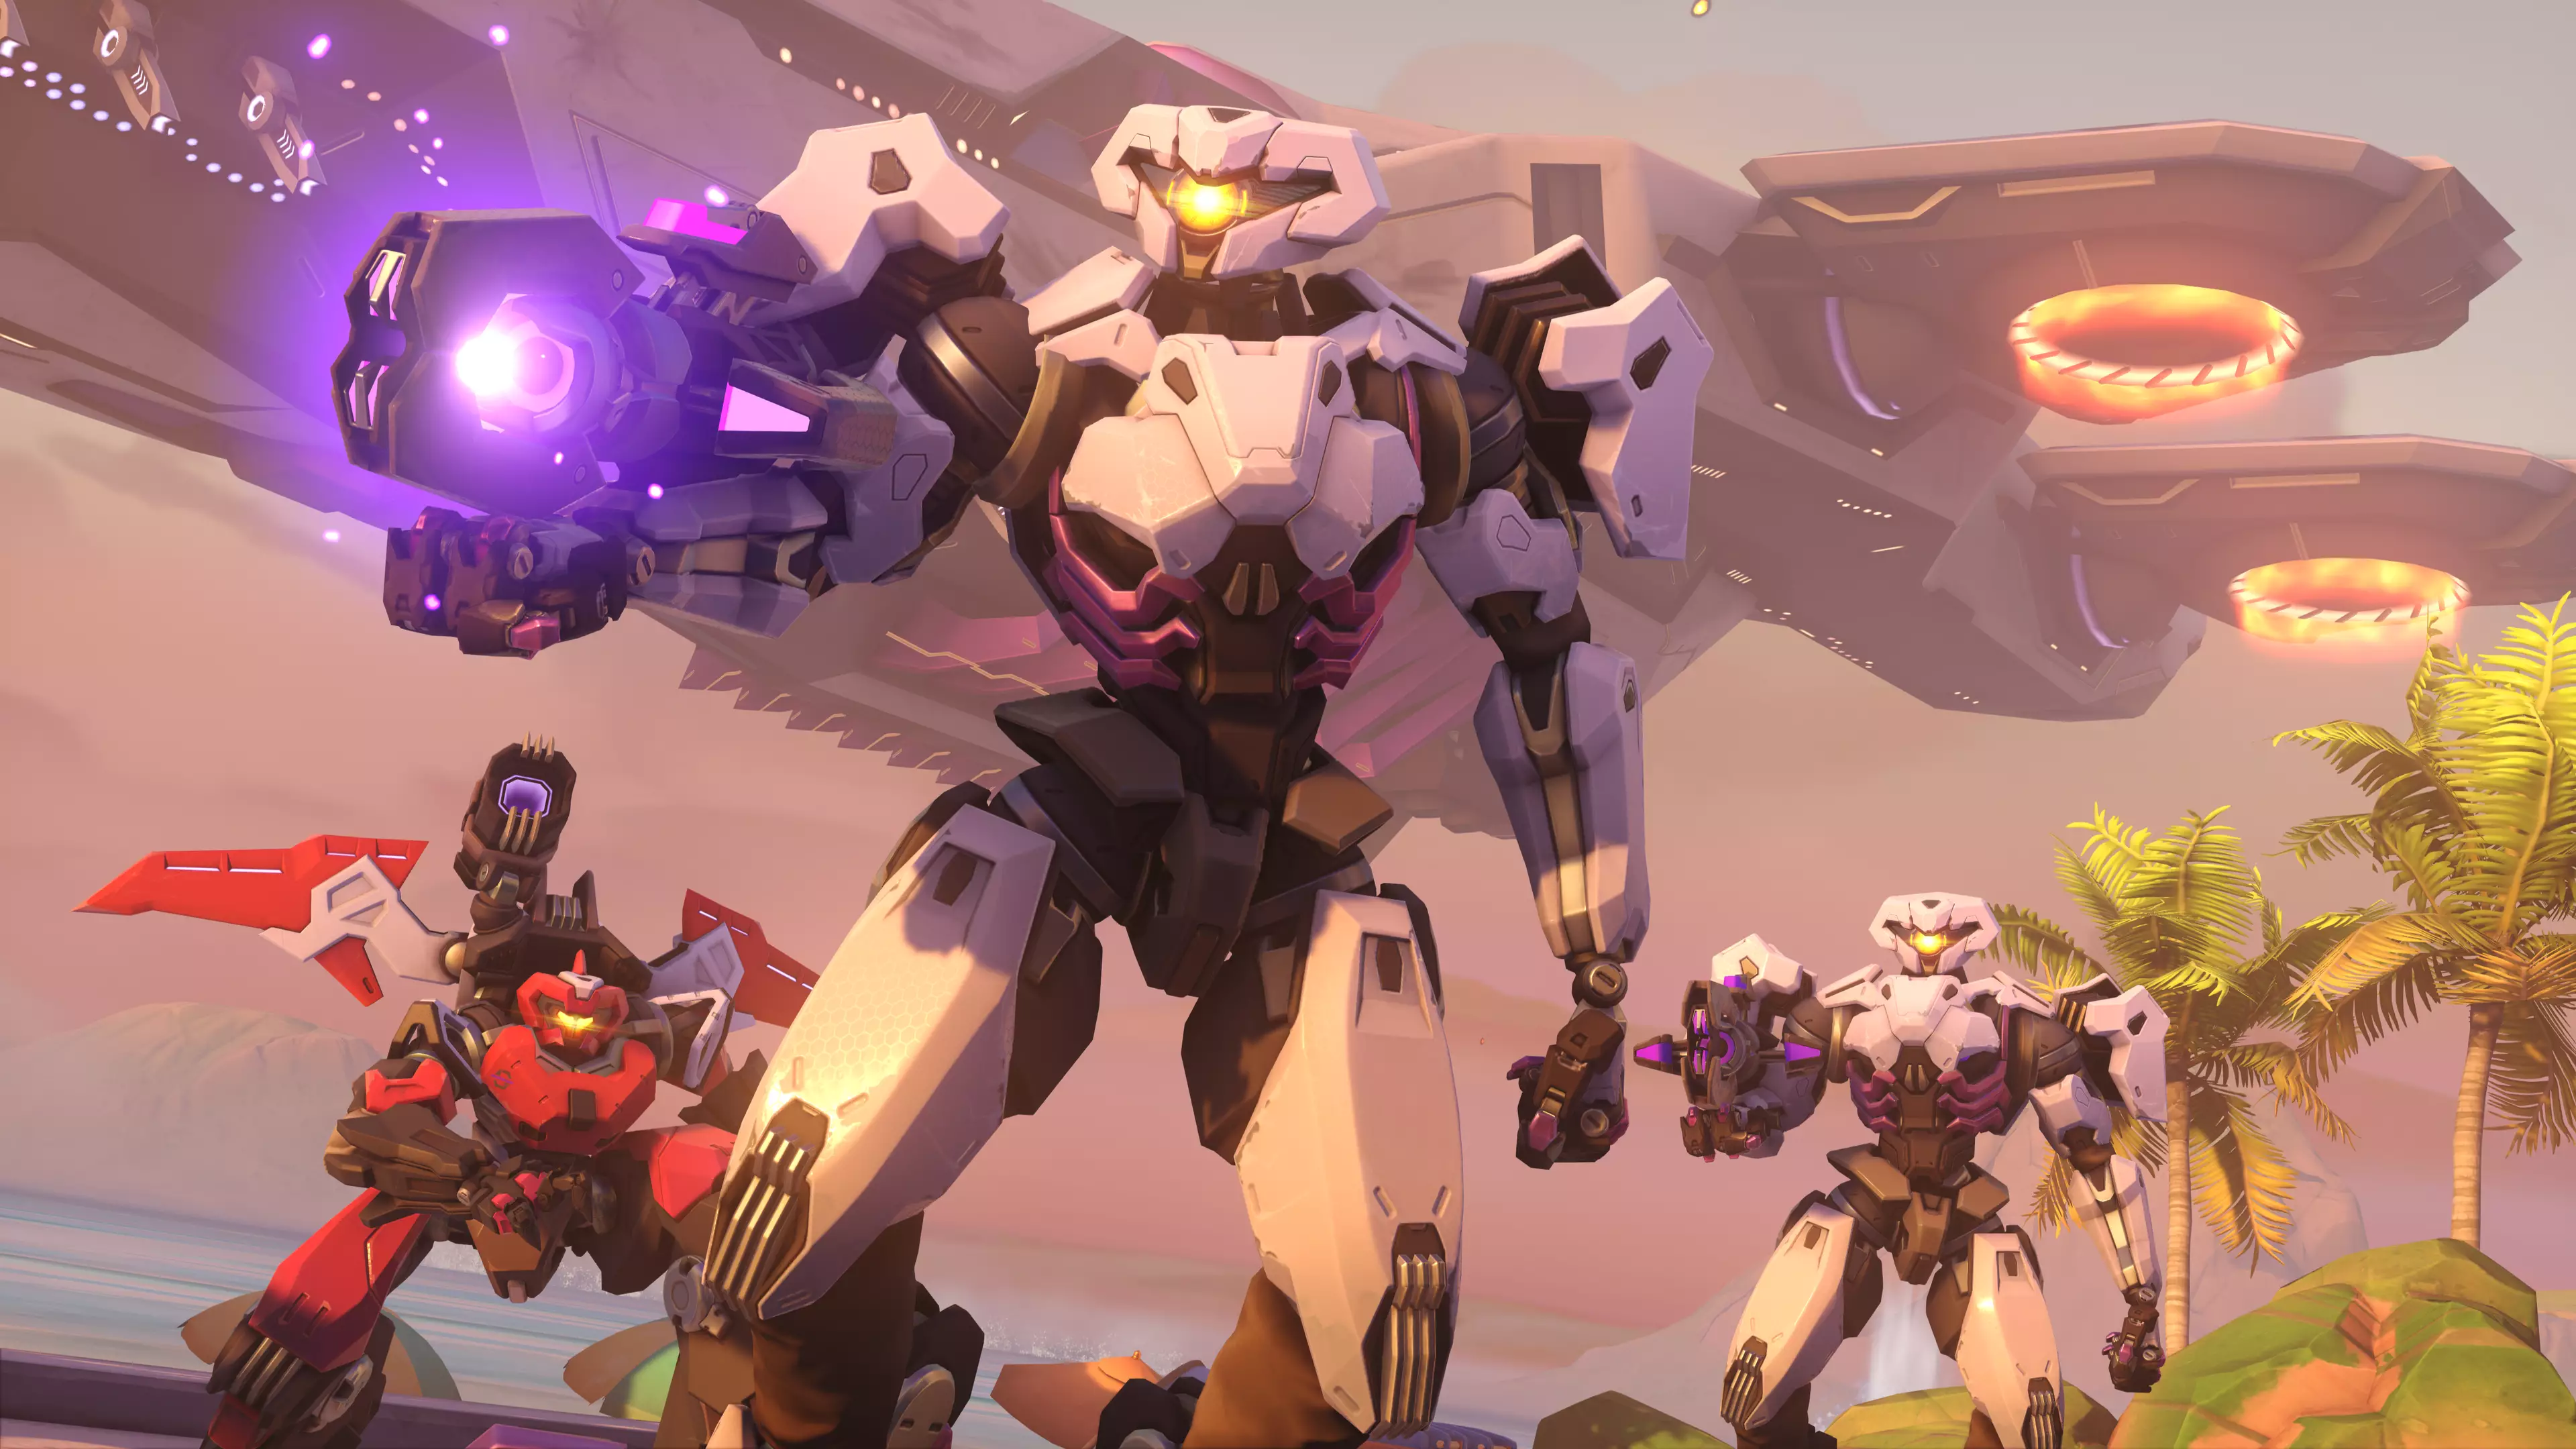 ​‘Overwatch 2’ Director Has ‘No Idea’ When The Game Will Be Released